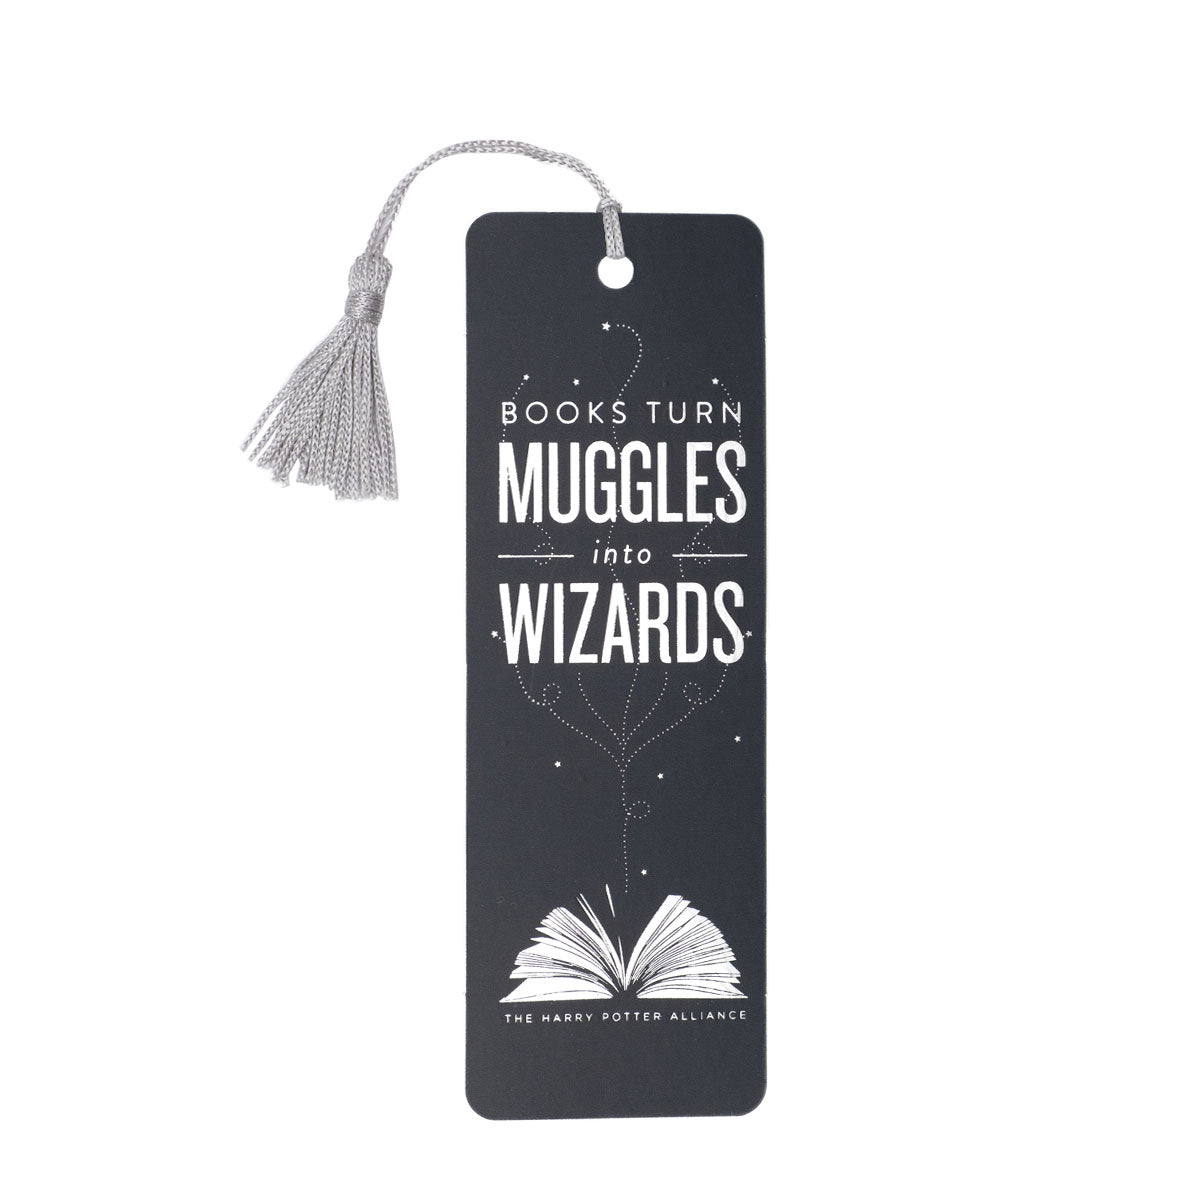 From Muggles to Wizards: Harry Potter Books 2